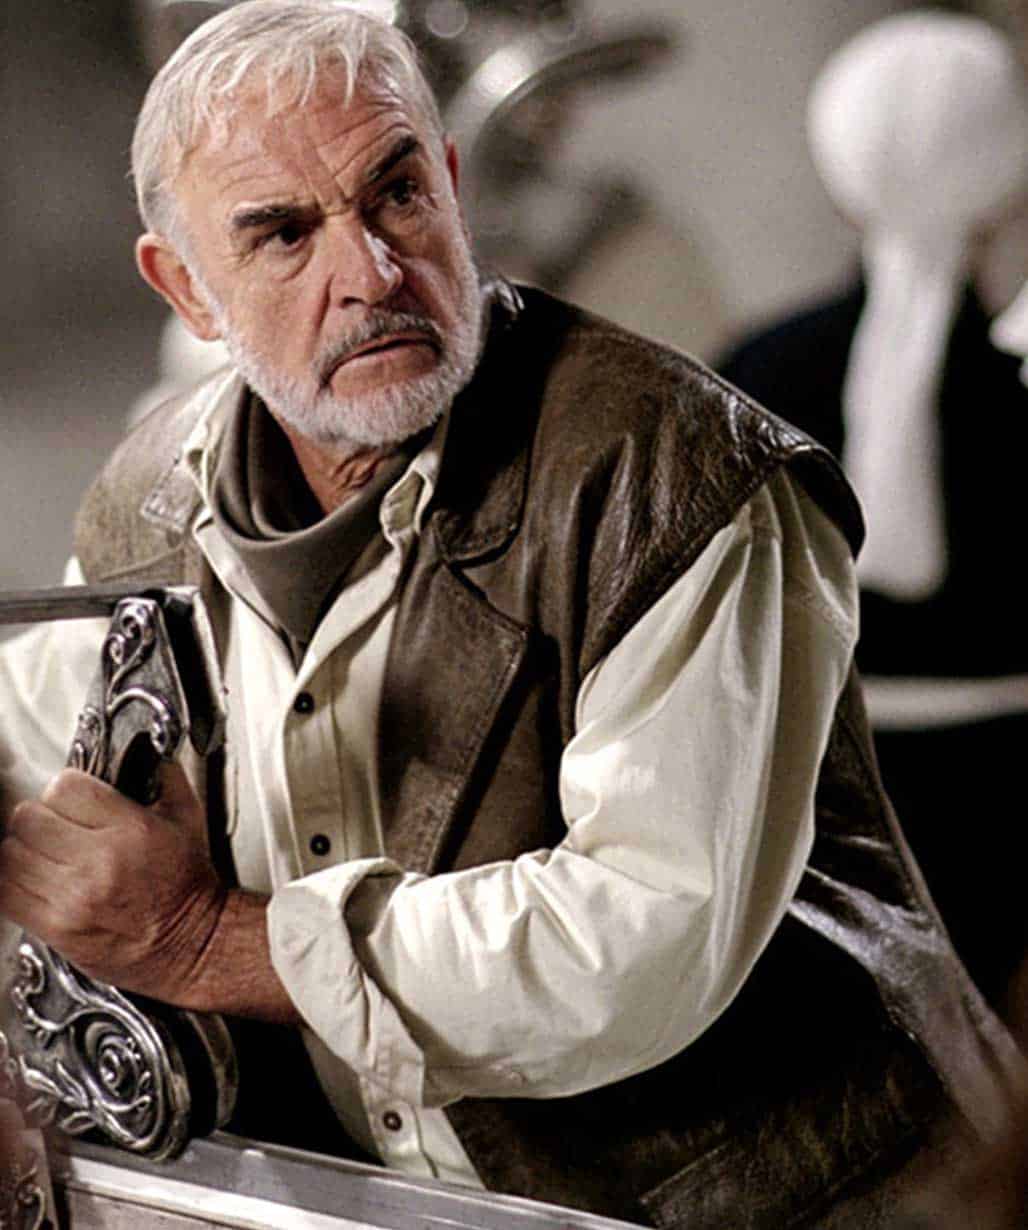 SEAN CONNERY THE LEAGUE OF EXTRAORDINARY GENTLEMEN BROWN LEATHER VEST